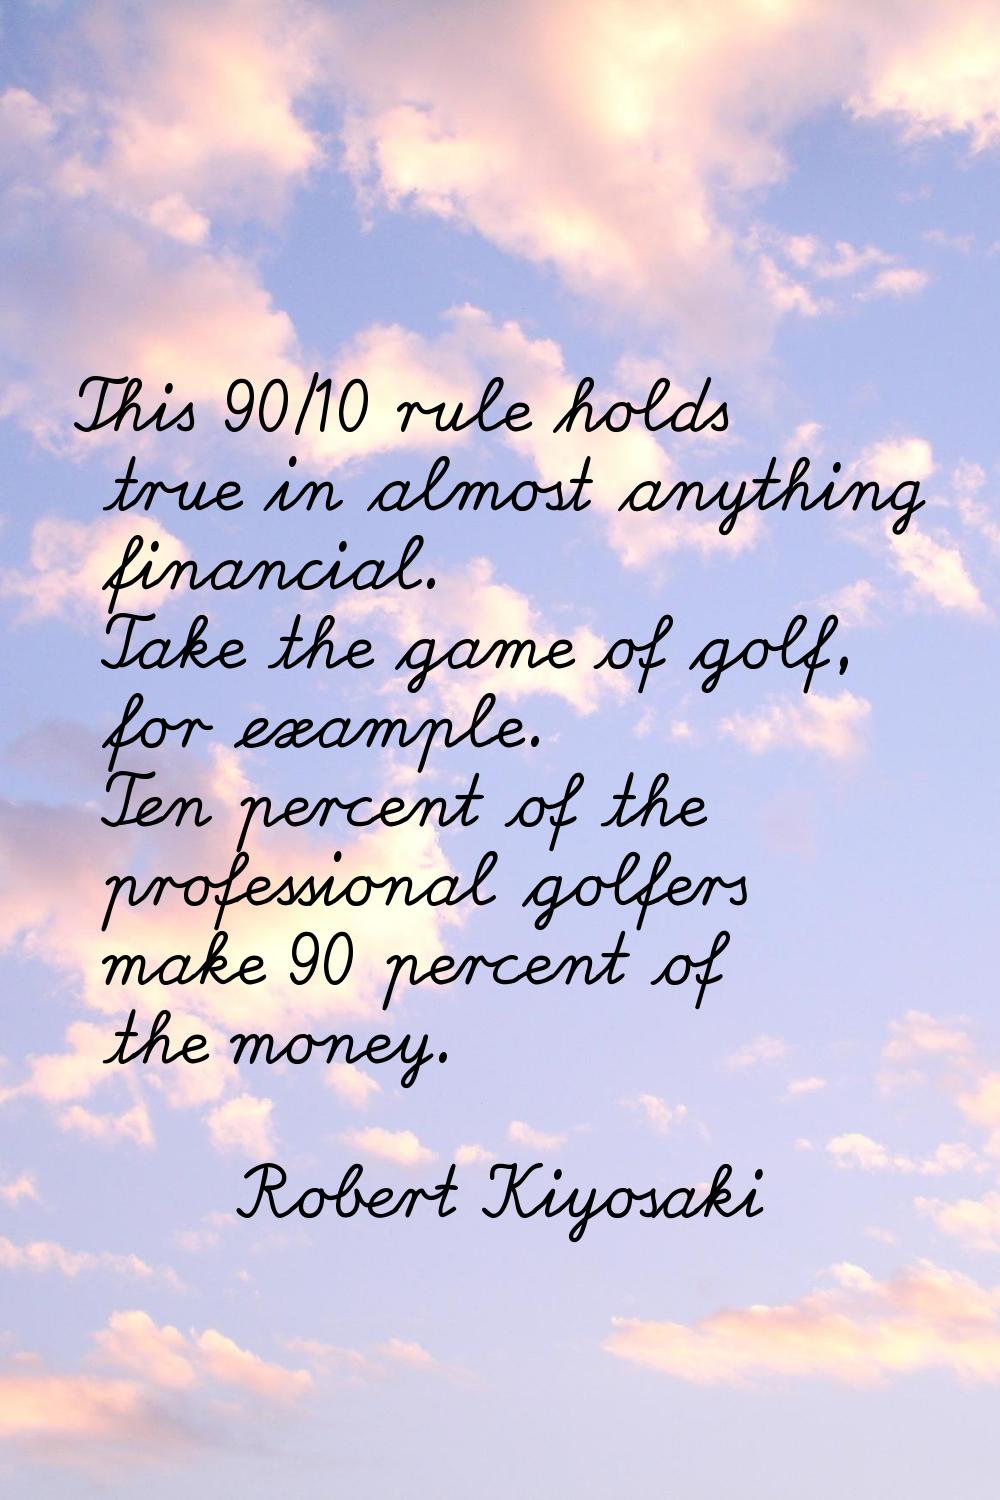 This 90/10 rule holds true in almost anything financial. Take the game of golf, for example. Ten pe